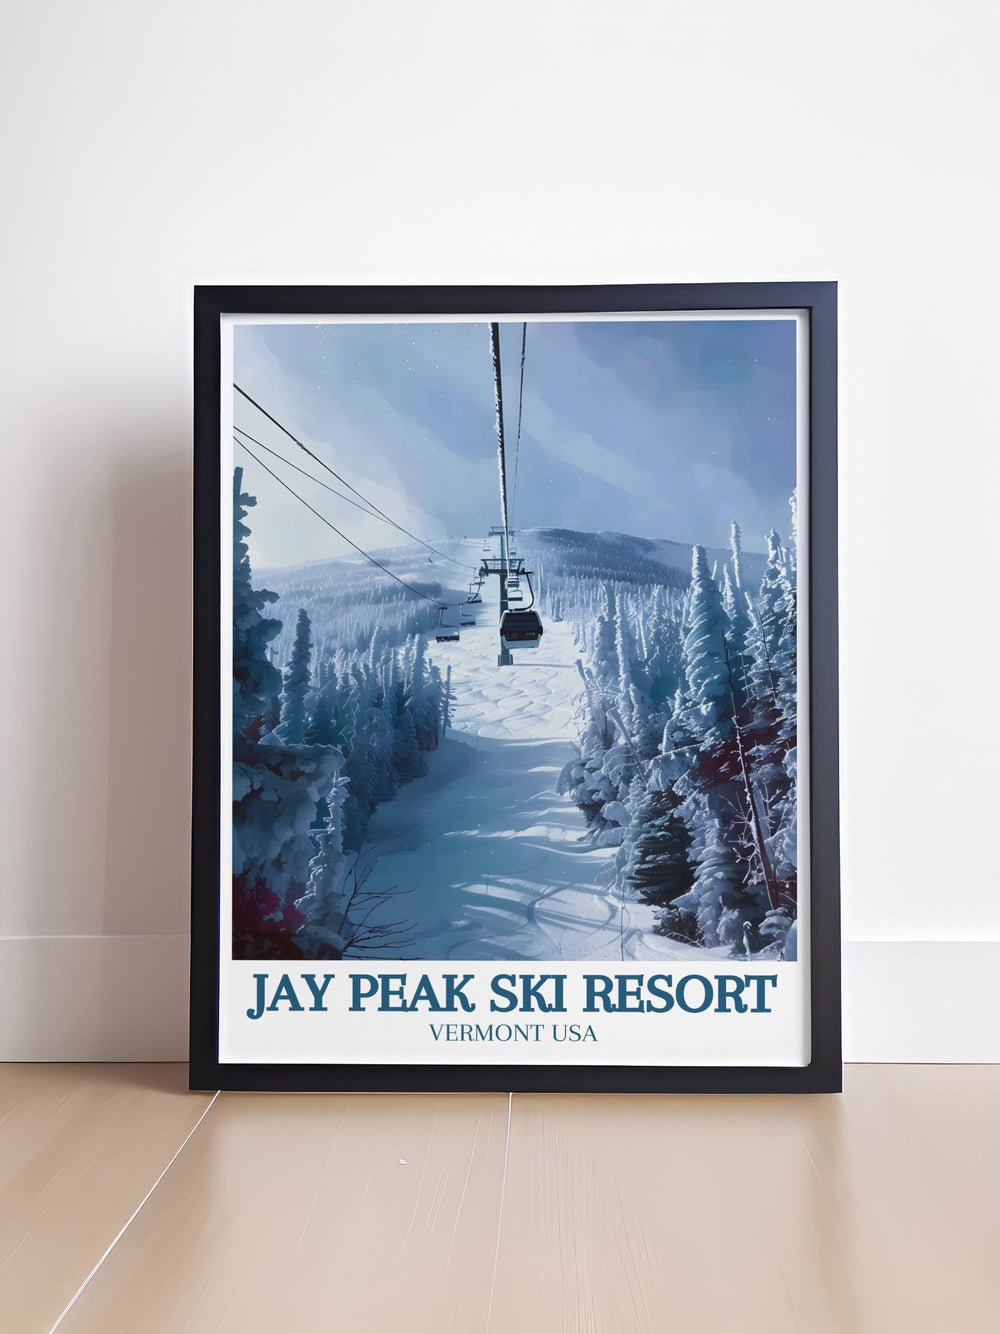 Featuring the majestic Green Mountains, this detailed print highlights the natural beauty and diverse wildlife surrounding Jay Peak.